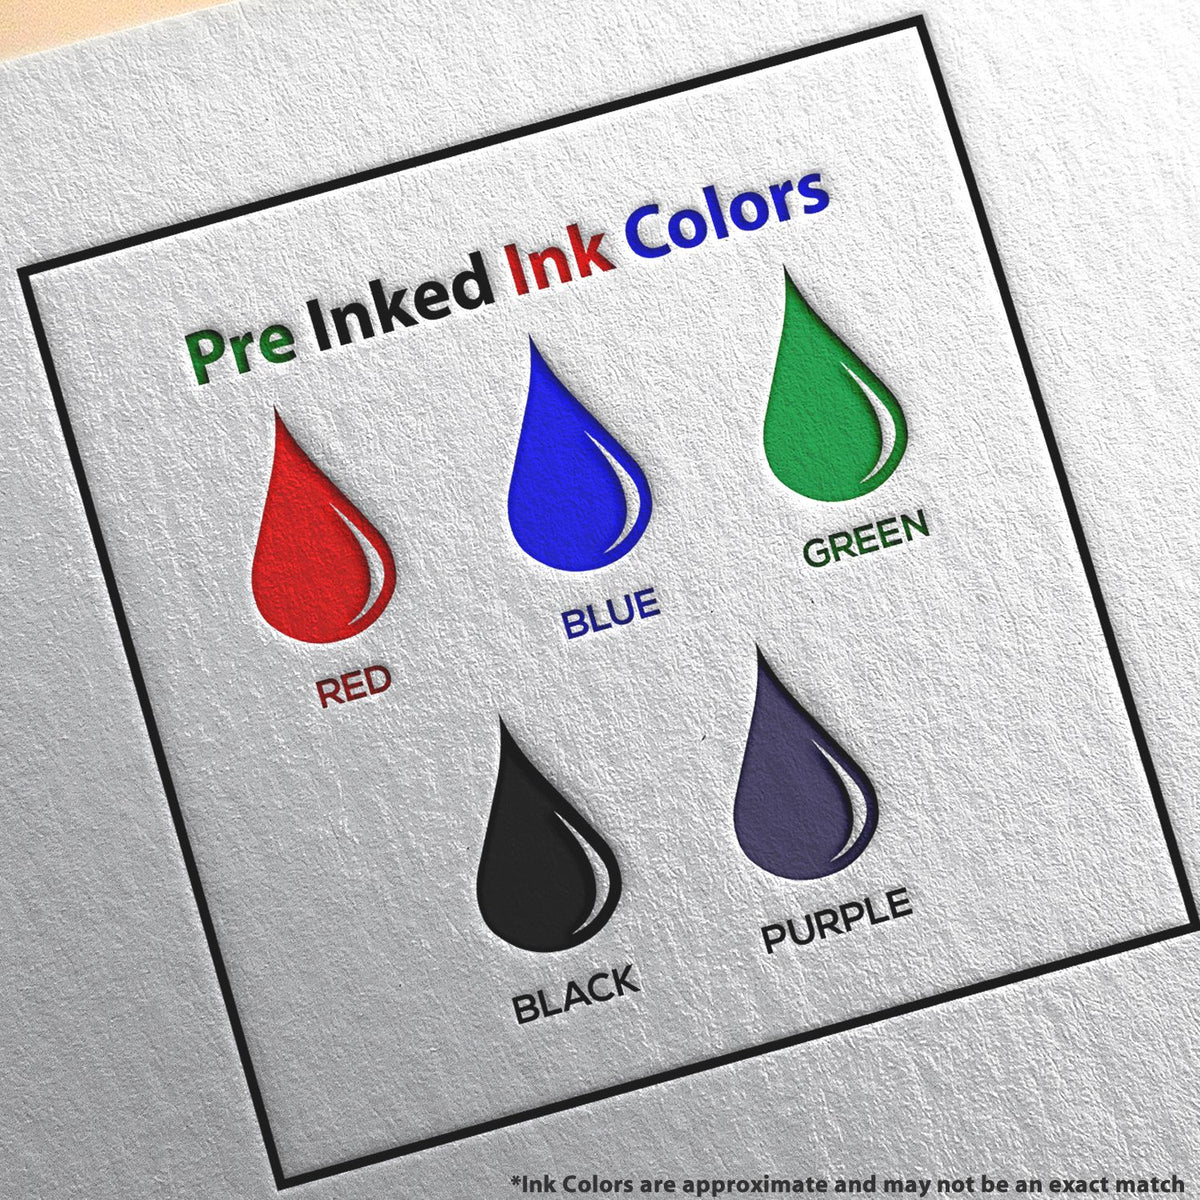 A picture showing the different ink colors or hues available for the Slim Pre-Inked Alabama Land Surveyor Seal Stamp product.